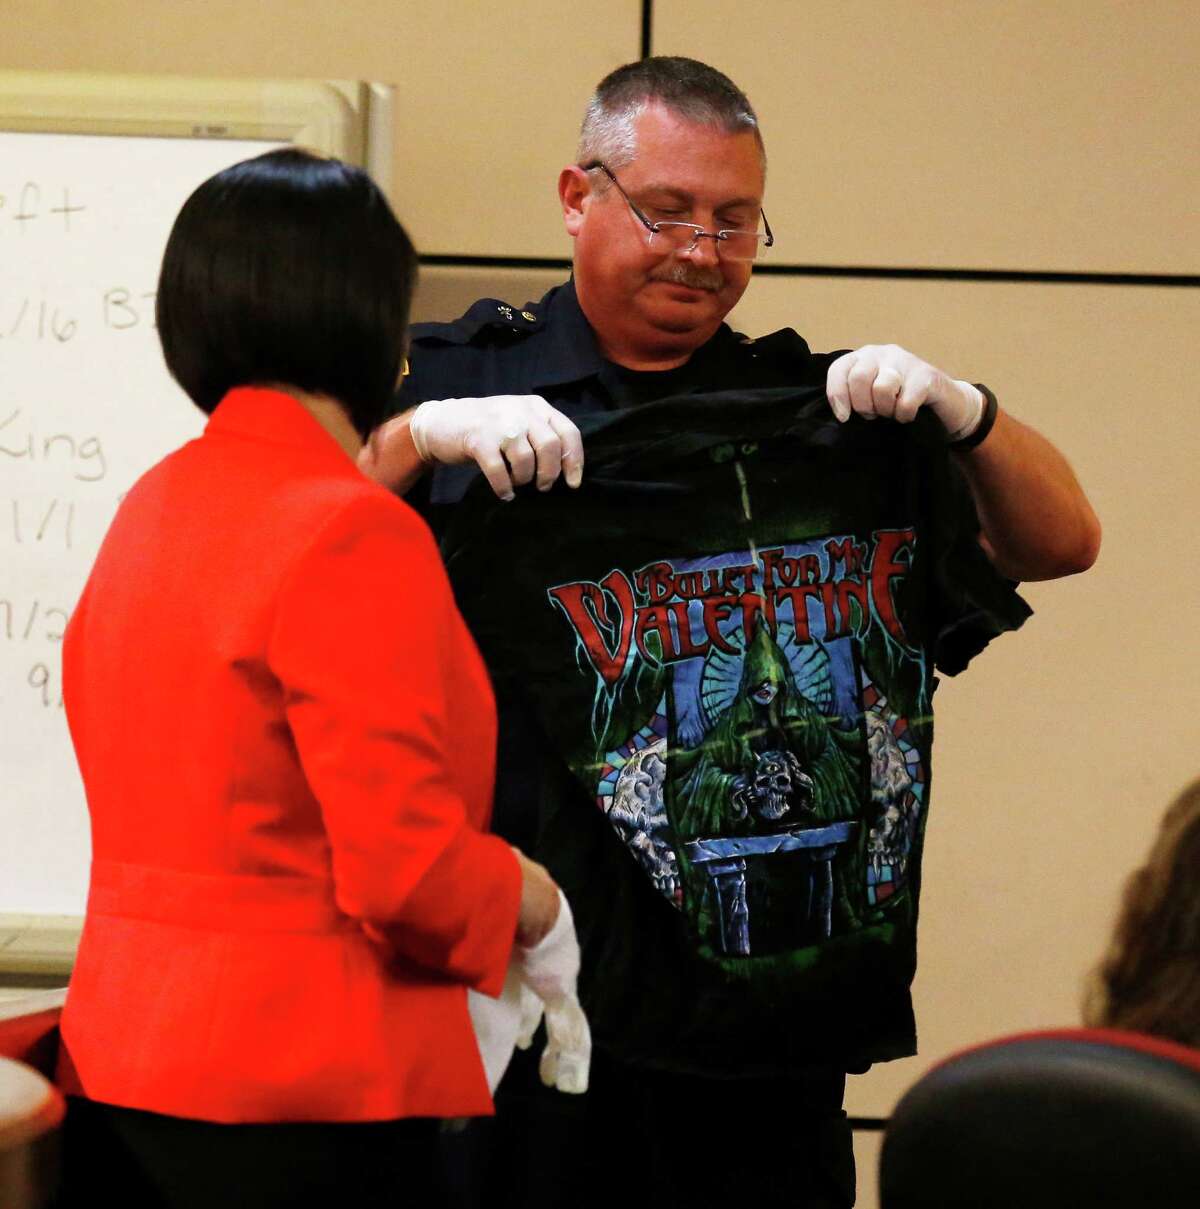 San Antonio Police Sgt. Ricky David Lopez (center) holds up a shirt belonging to murder victim Daniel Lee Cantu during questioning from prosecutor Kimberly Gonzalez during the Anthony Lee Smith murder trial in the 186th State District Court with Judge Jefferson Moore presiding on Thursday, Mar. 10, 2016. Smith is alleged to have shot Cantu and the shirt appeared to be marked with yellow-dashed lines to indicate the entry point of the bullet wound. (Kin Man Hui/San Antonio Express-News)